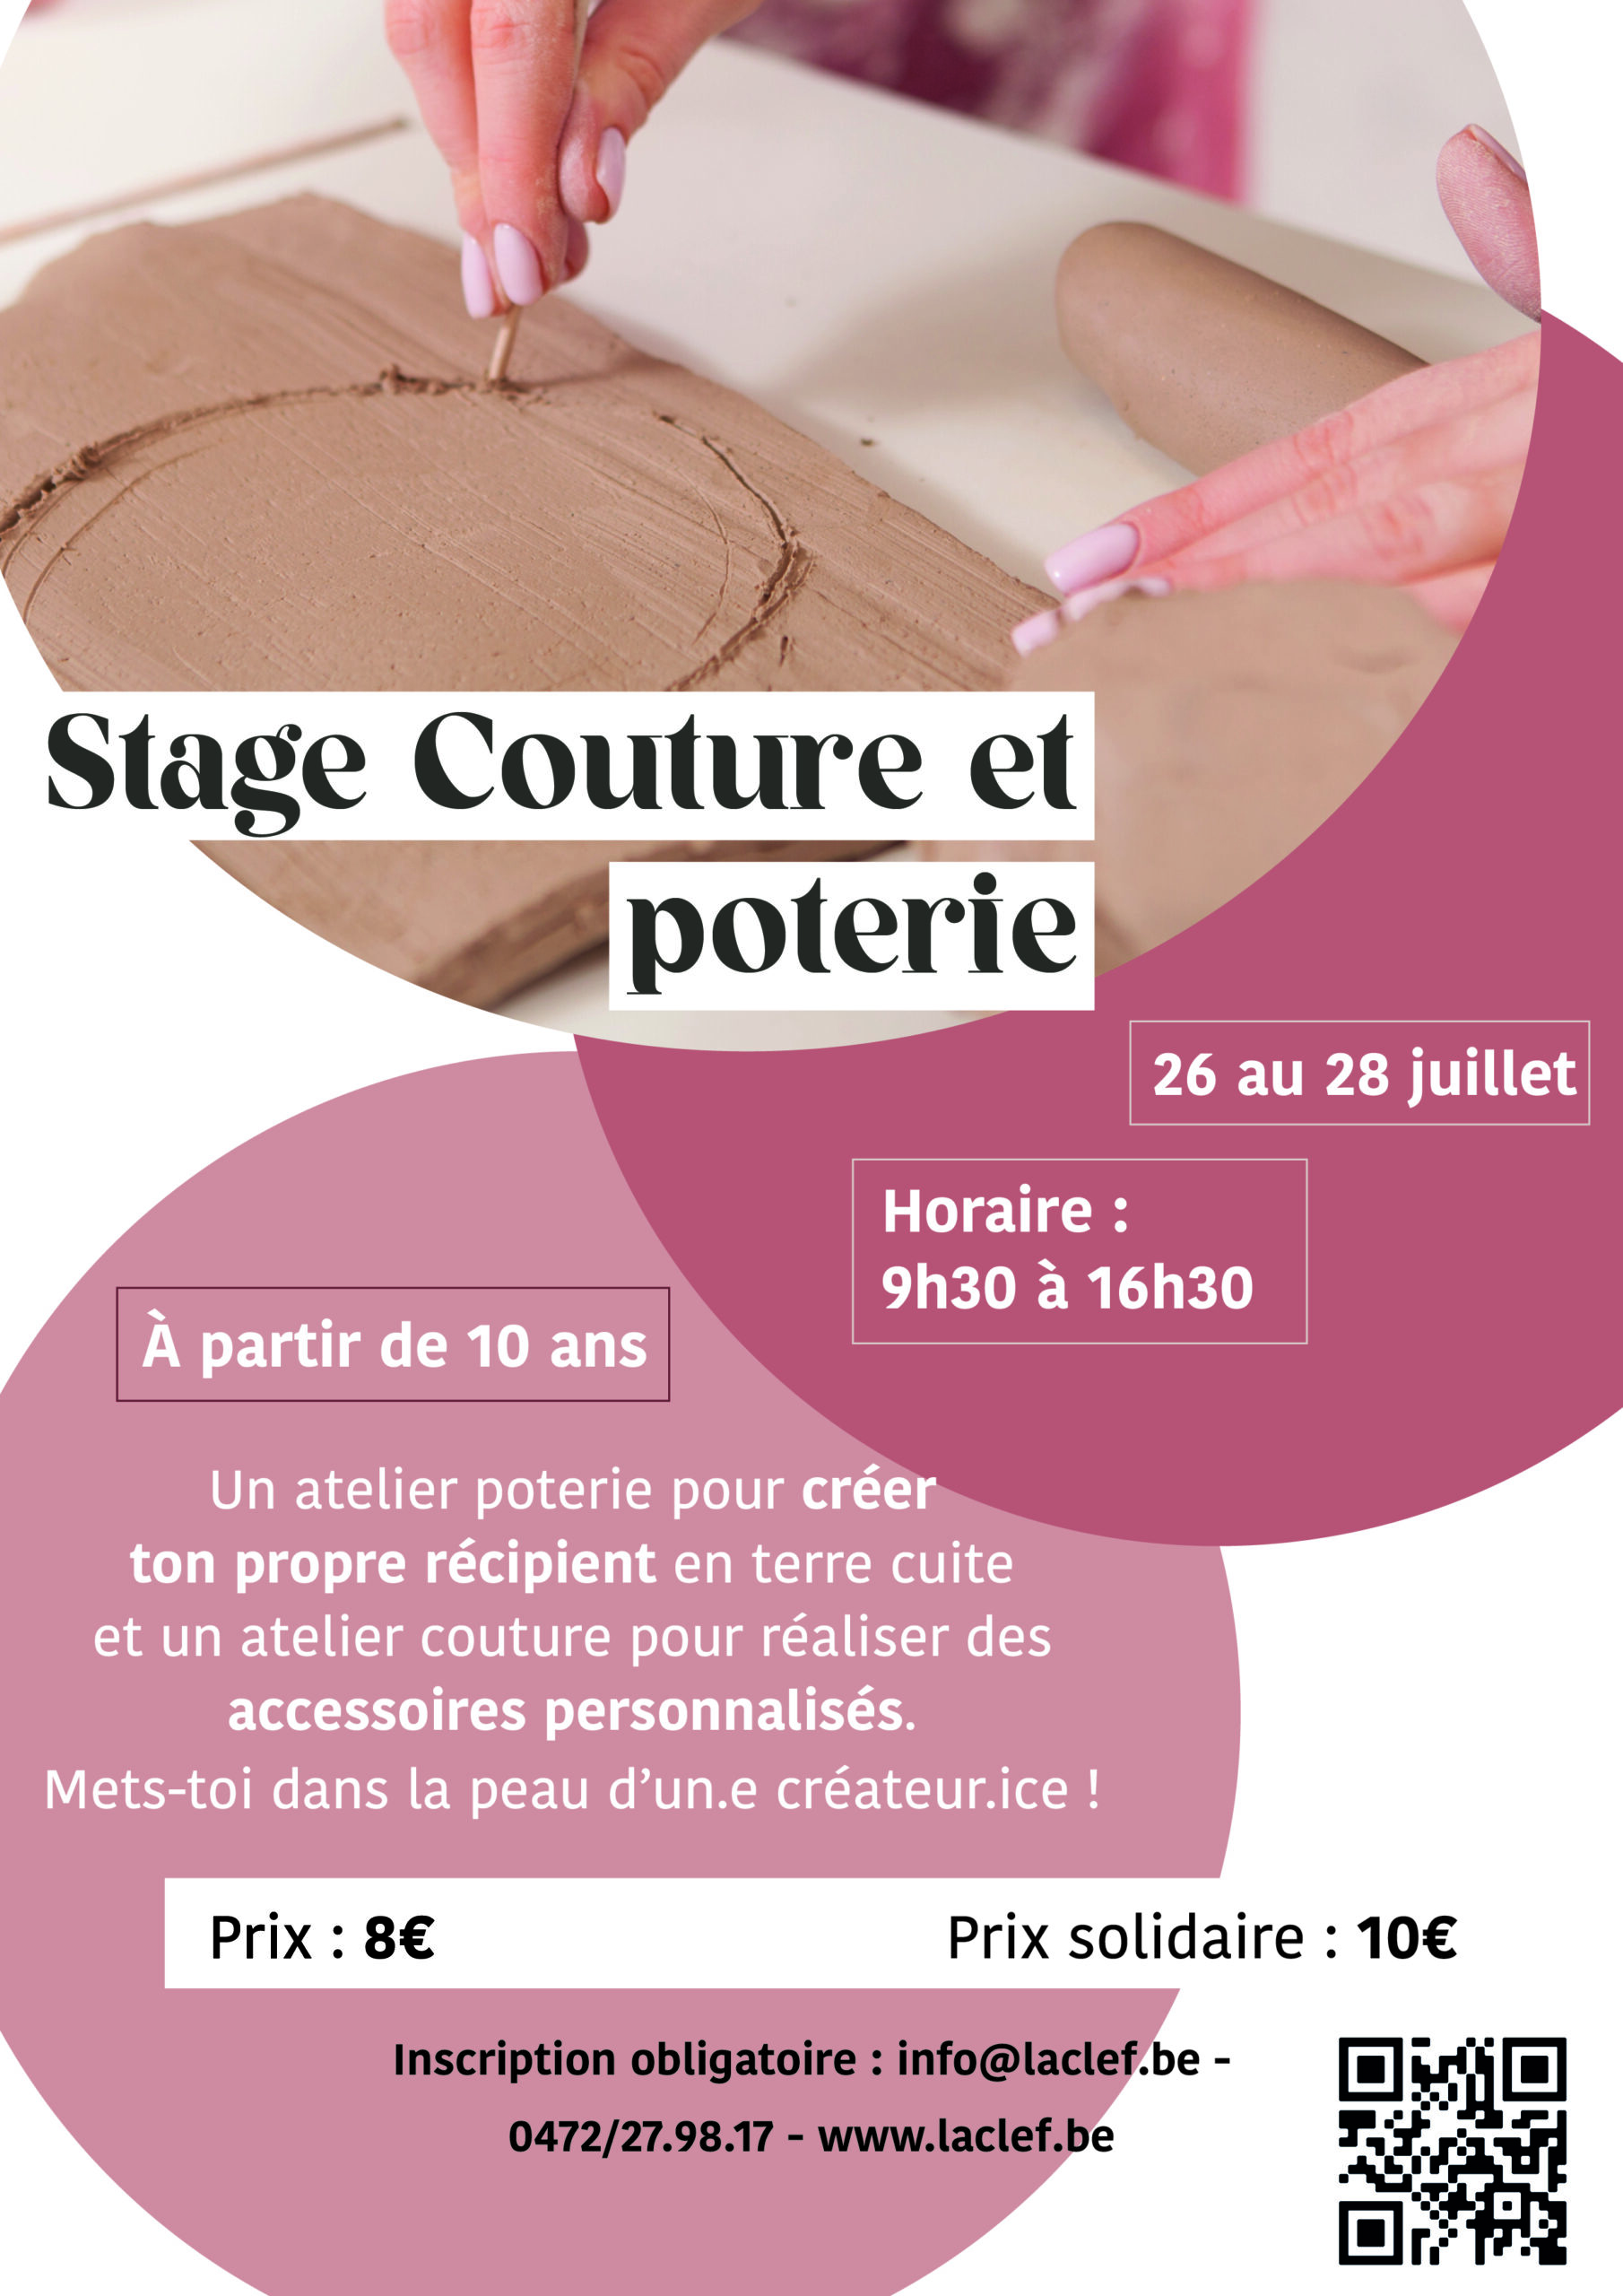 Stage Couture et poterie